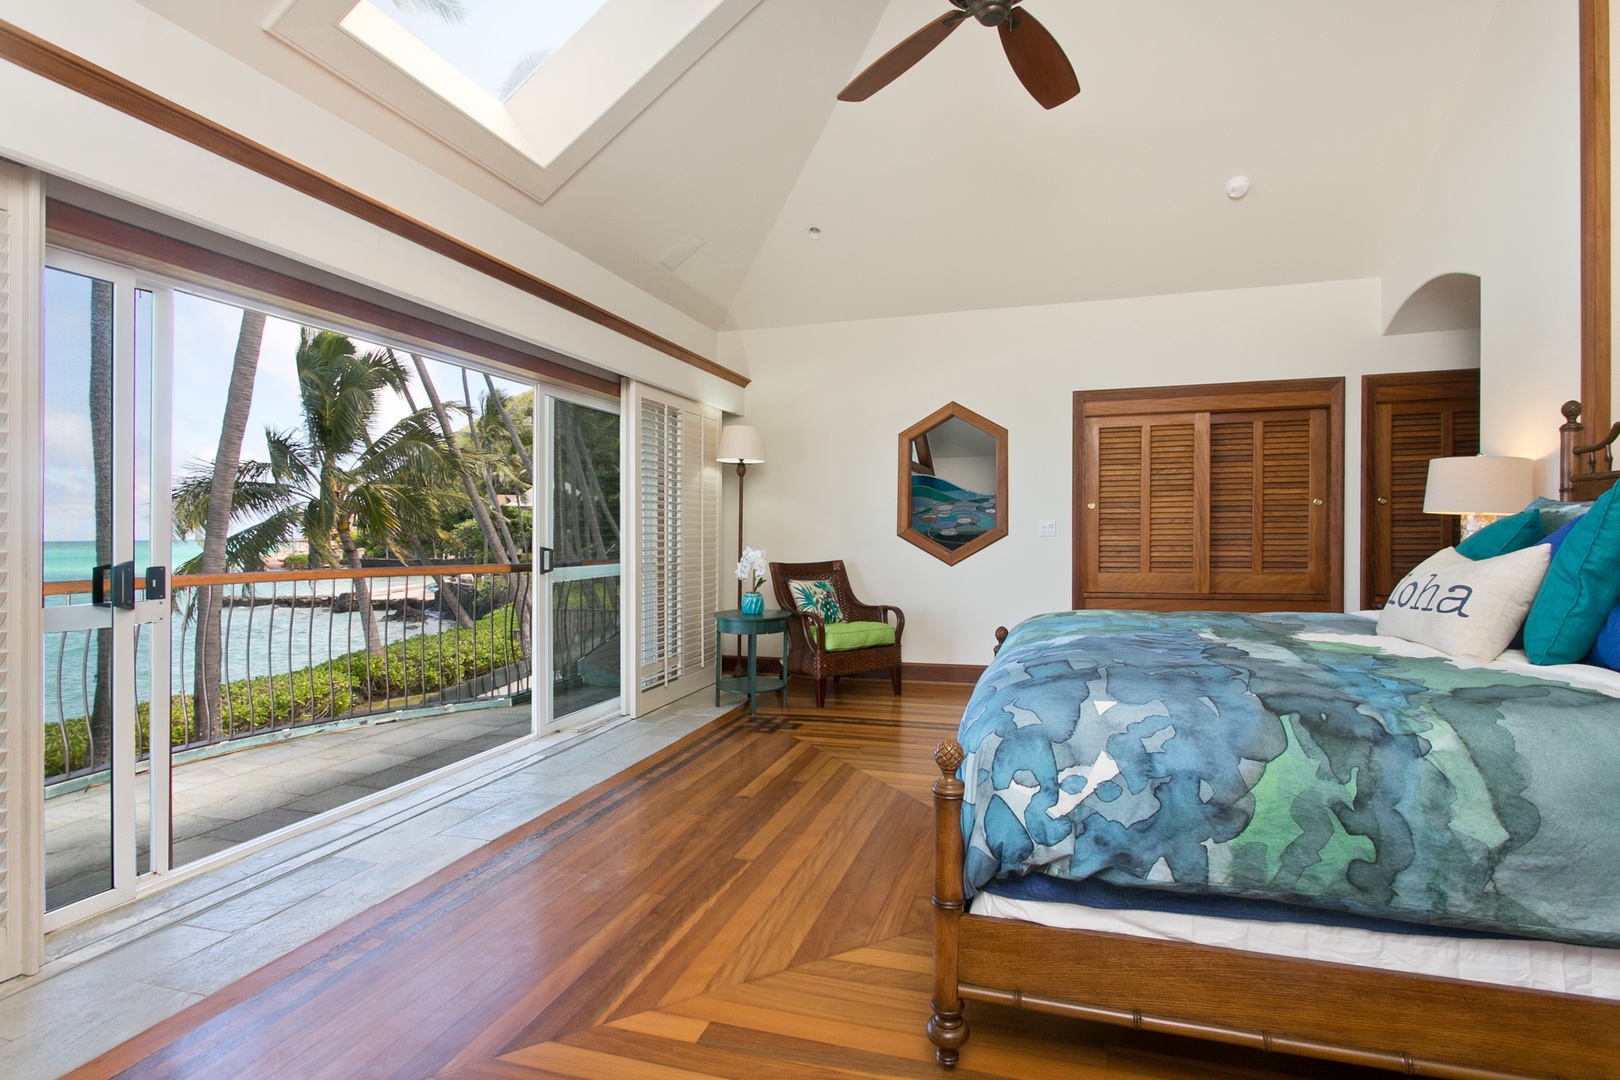 Kailua Vacation Rentals, Hale Melia* - Spacious and airy bedroom for a restful retreat.